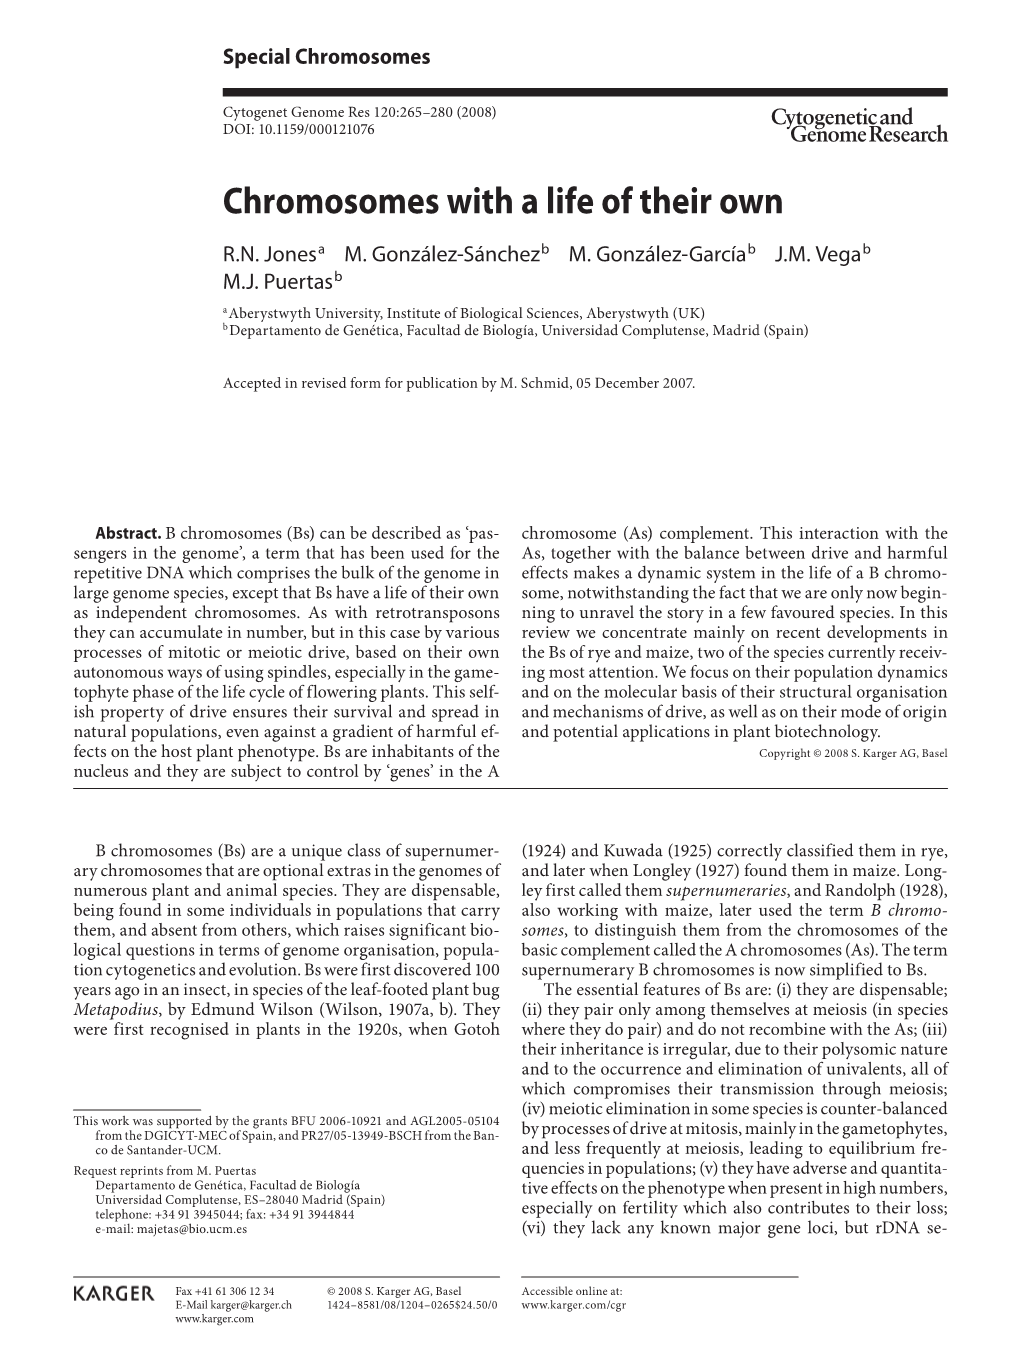 Chromosomes with a Life of Their Own